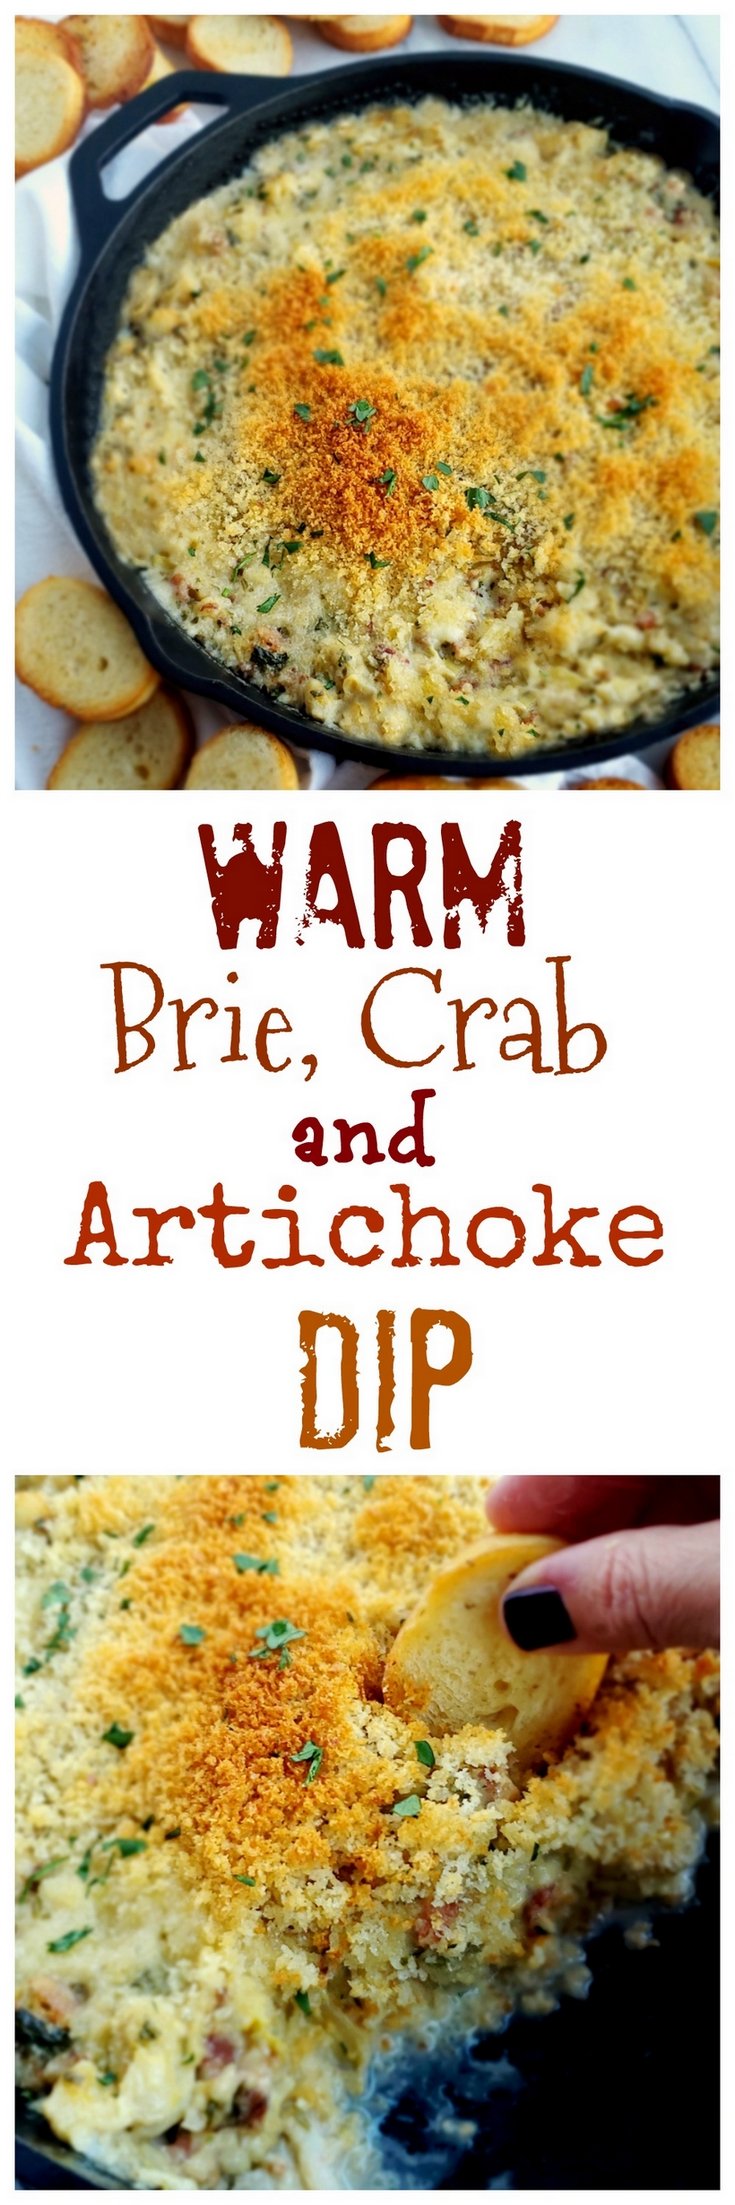 Buttery Brie cheese covered with a layer of baked bread crumbs reveals a hot dip packed with crab, artichoke and bacon. It doesn't get much better than this Warm Brie, Crab and Artichoke Dip! #noblepig #lowcarb #ketorecipe #crabdip via @cmpollak1